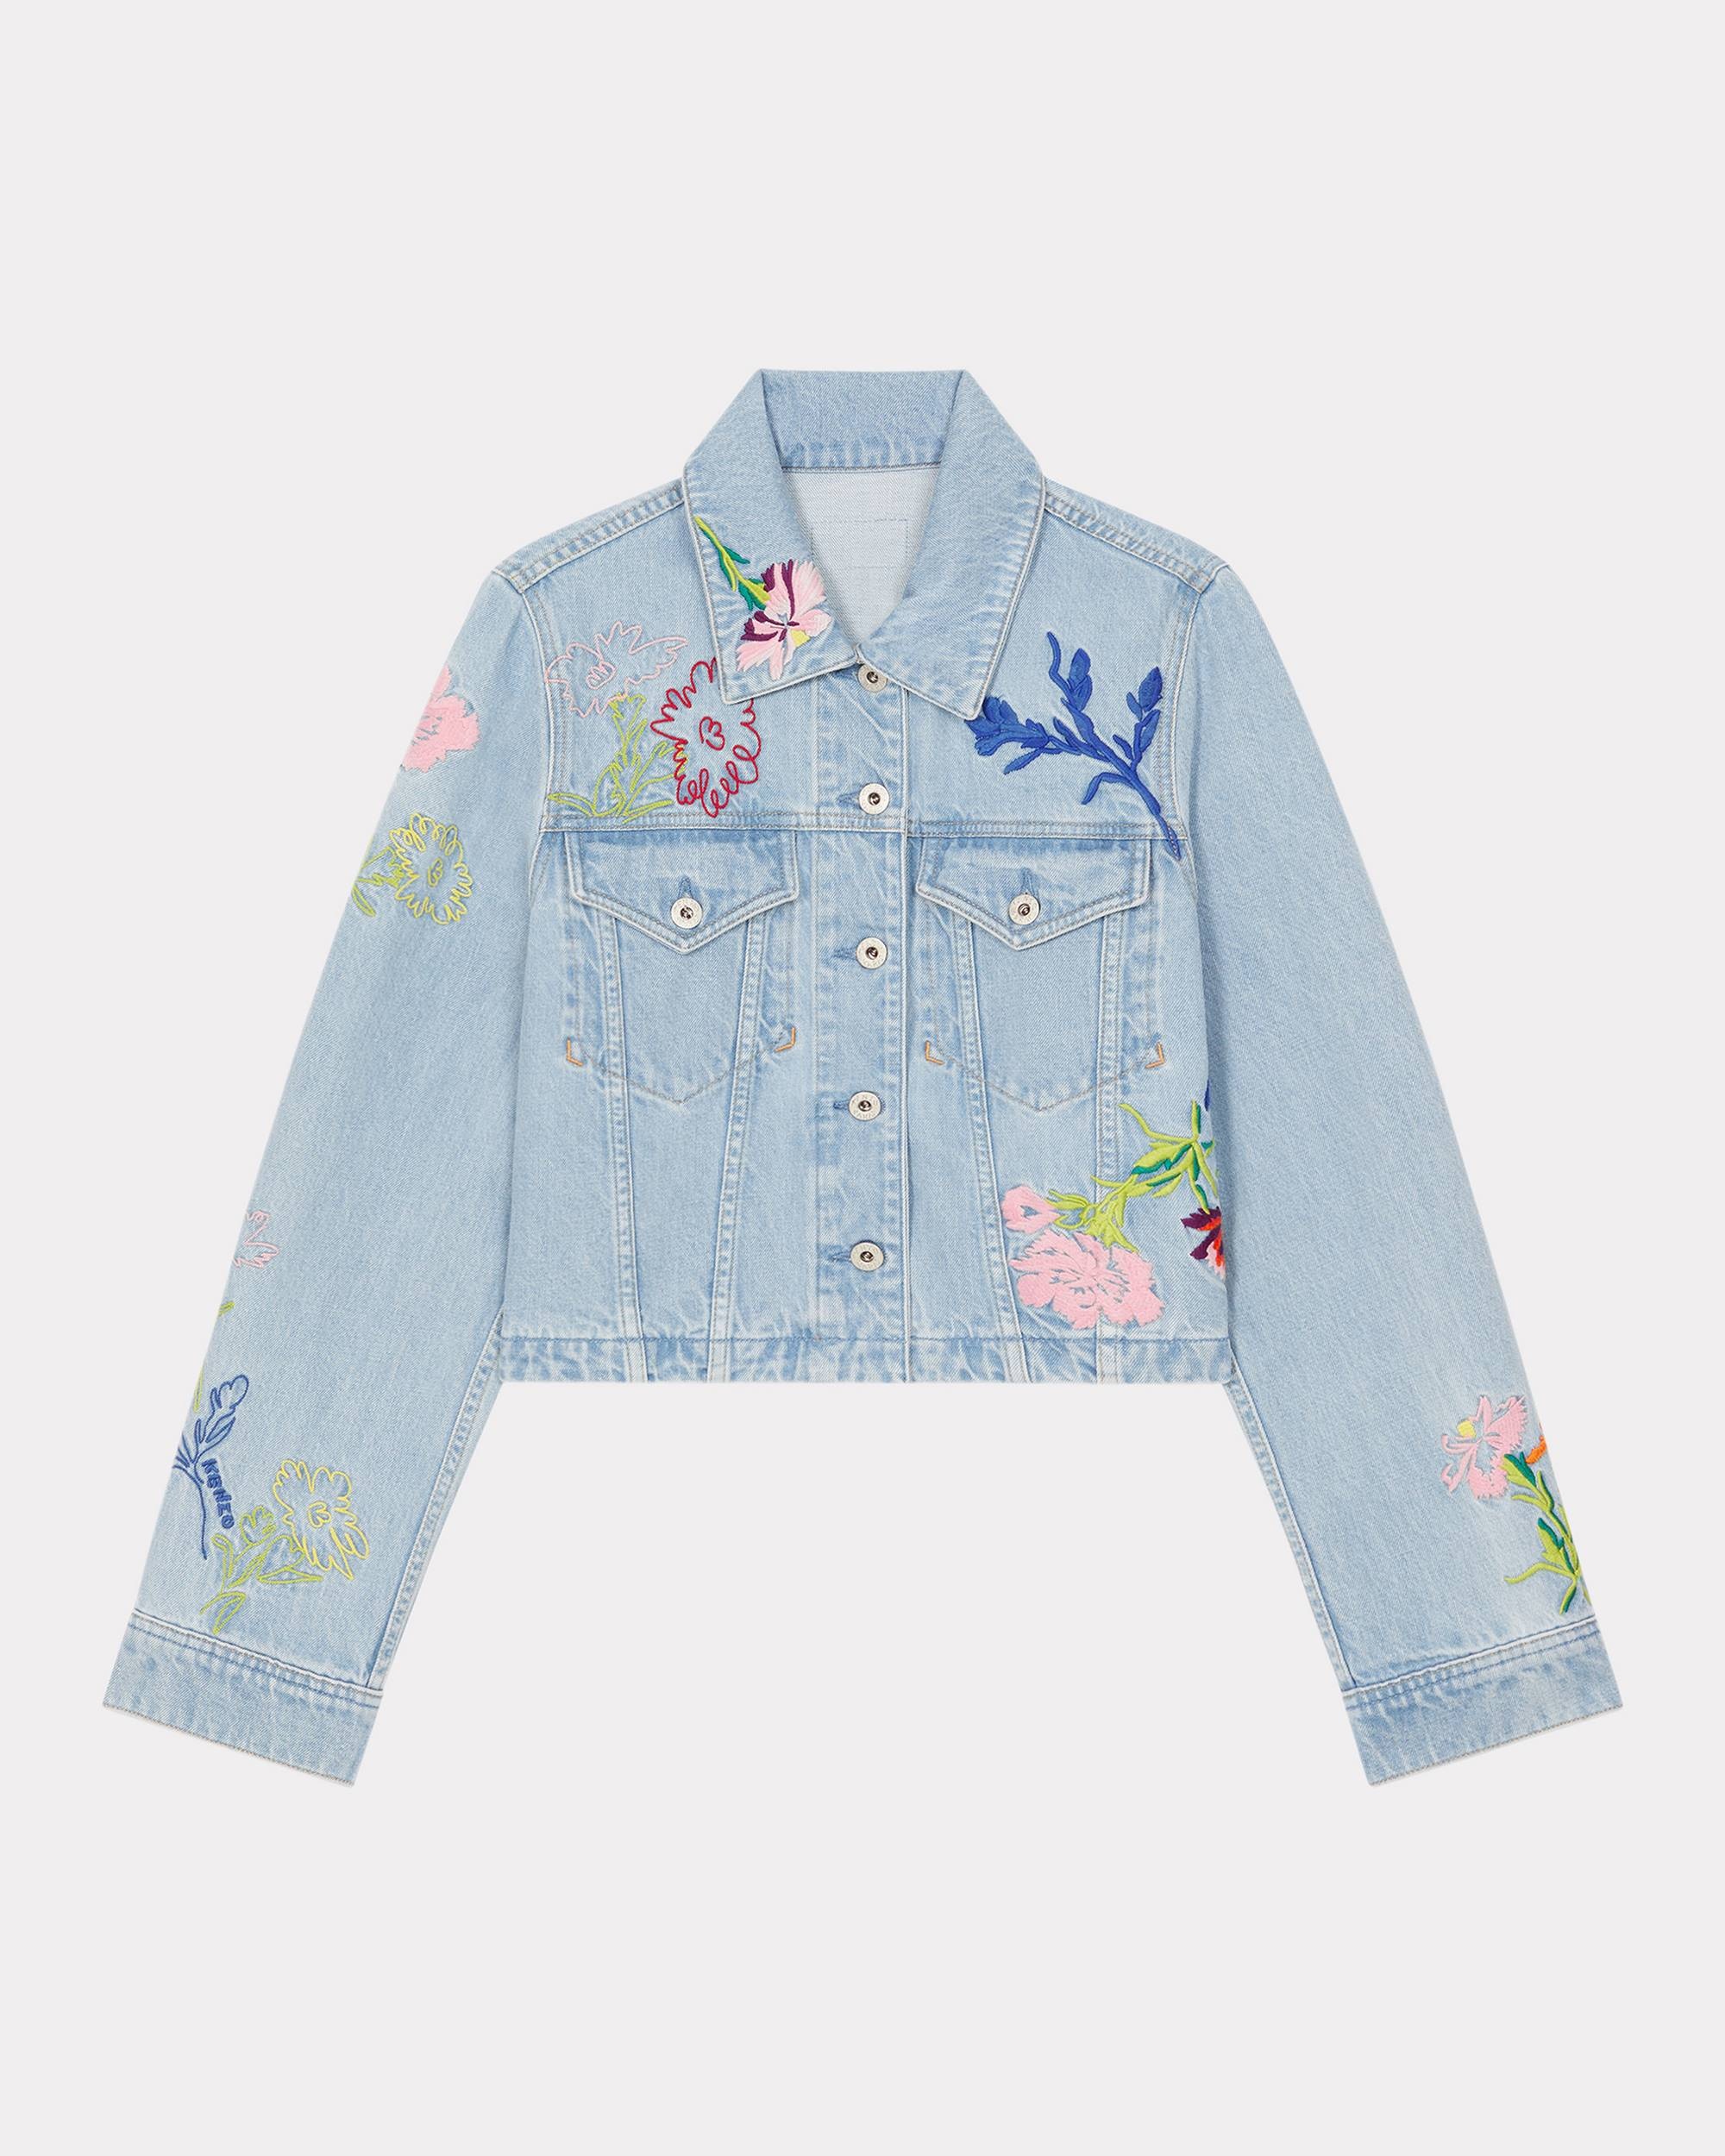 'KENZO Drawn Flowers' embroidered trucker jacket - 1